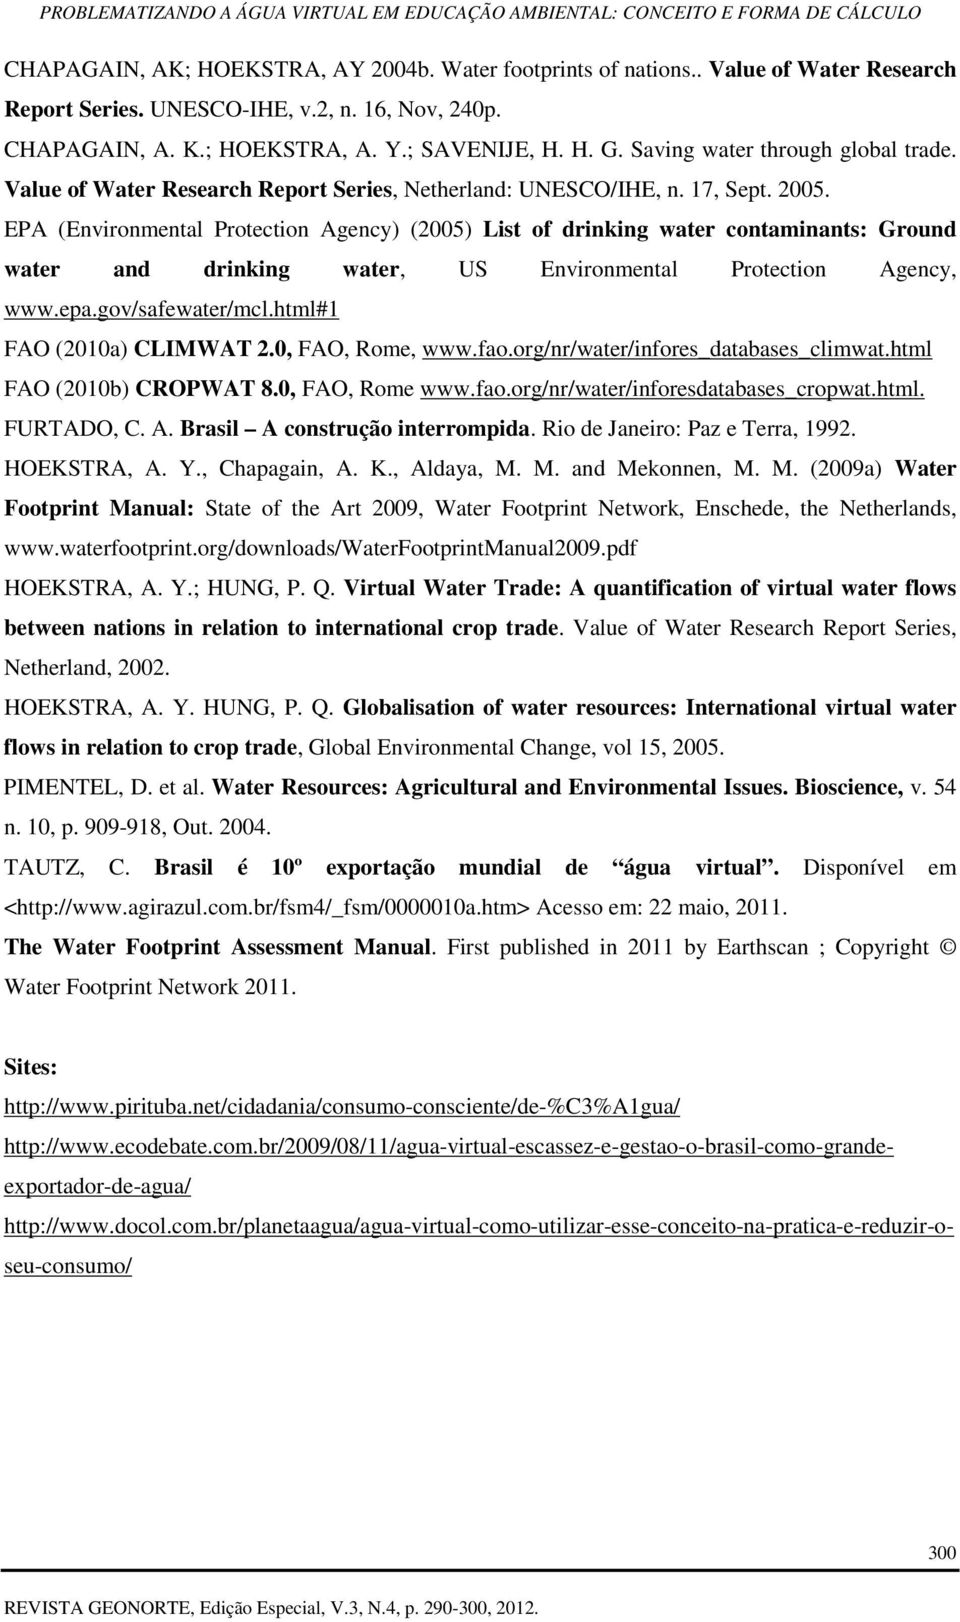 EPA (Environmental Protection Agency) (2005) List of drinking water contaminants: Ground water and drinking water, US Environmental Protection Agency, www.epa.gov/safewater/mcl.